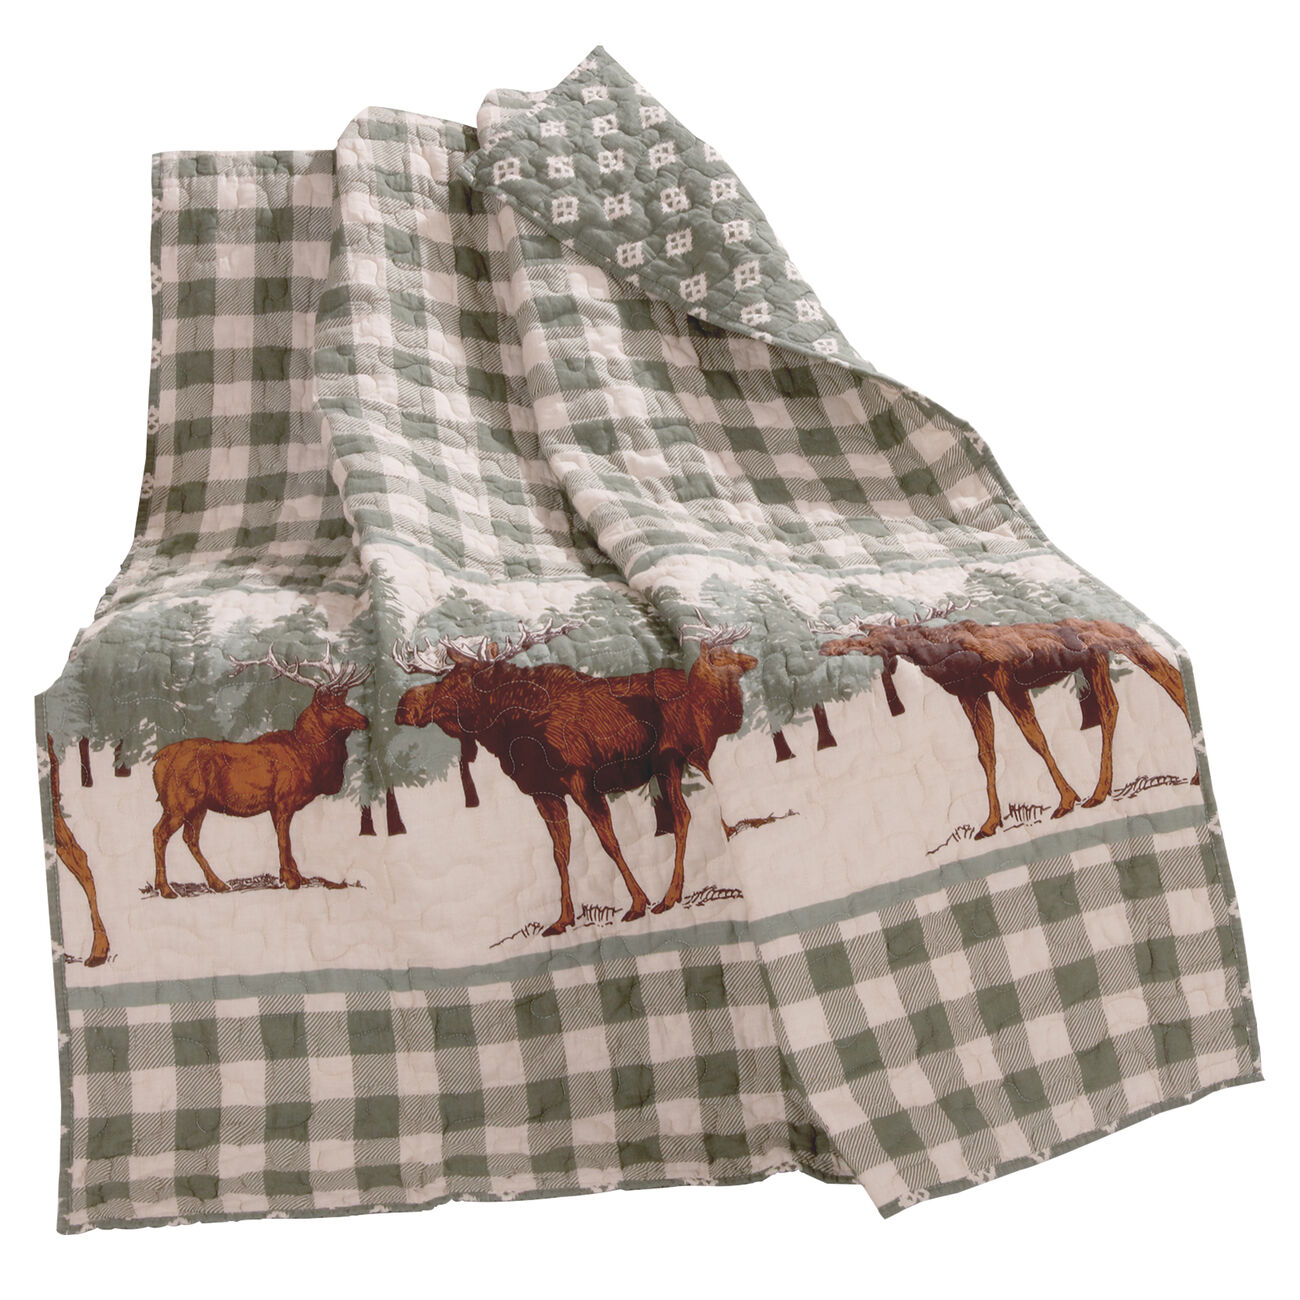 Fabric Throw Blanket with Plaid and Animal Print, Green and Brown - BM223375